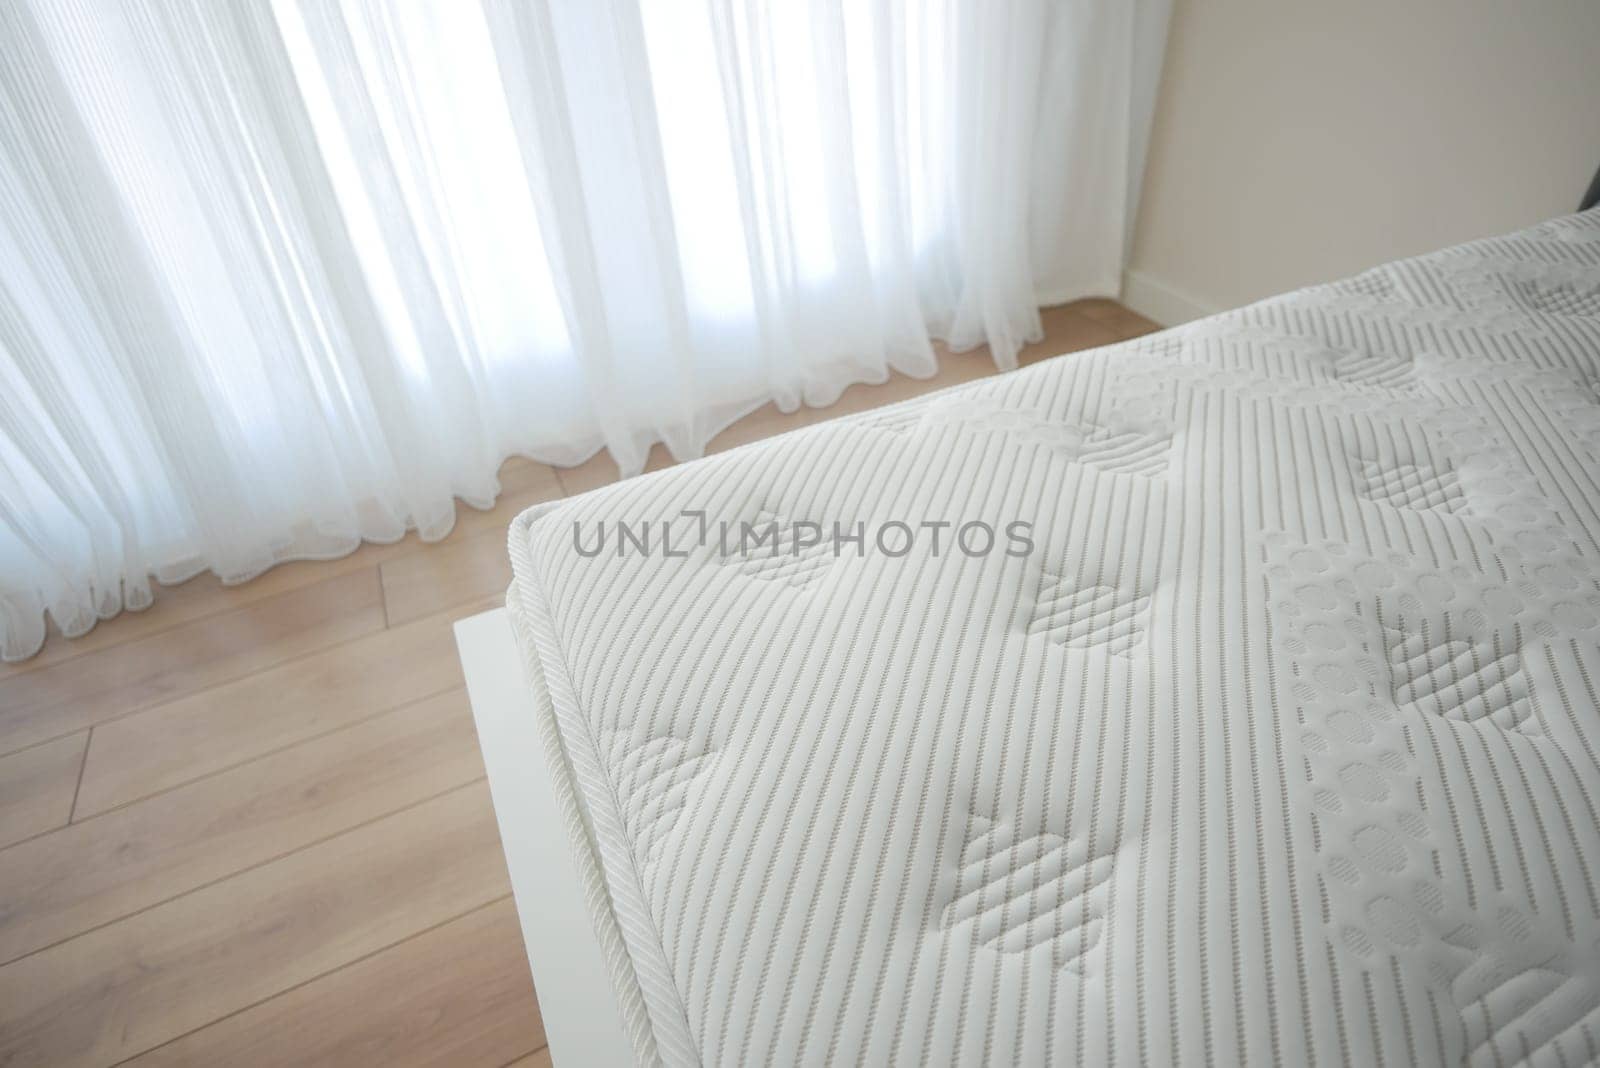 Background of comfortable mattress, top view by towfiq007